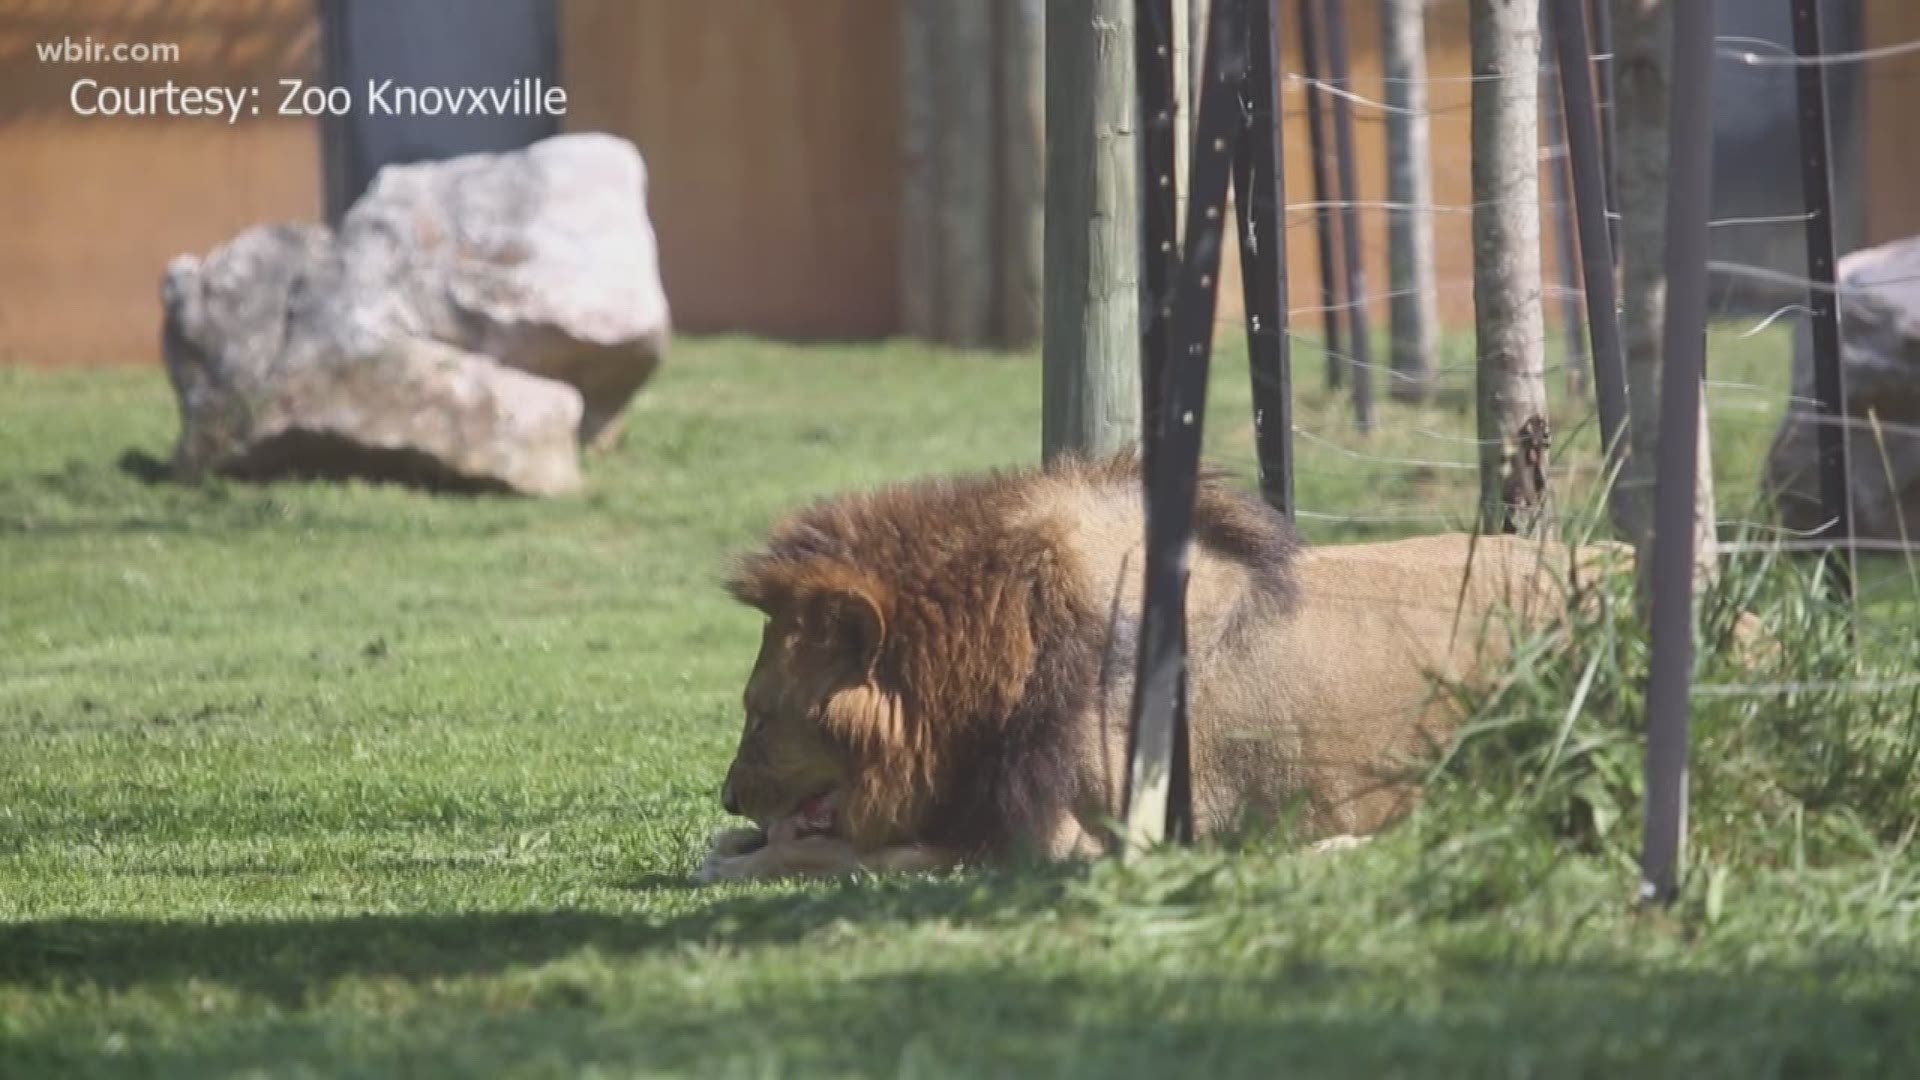 Disney's new version of the Lion King hits theaters on Friday, and Zoo Knoxville has an array of animals who would have been the perfect stars.